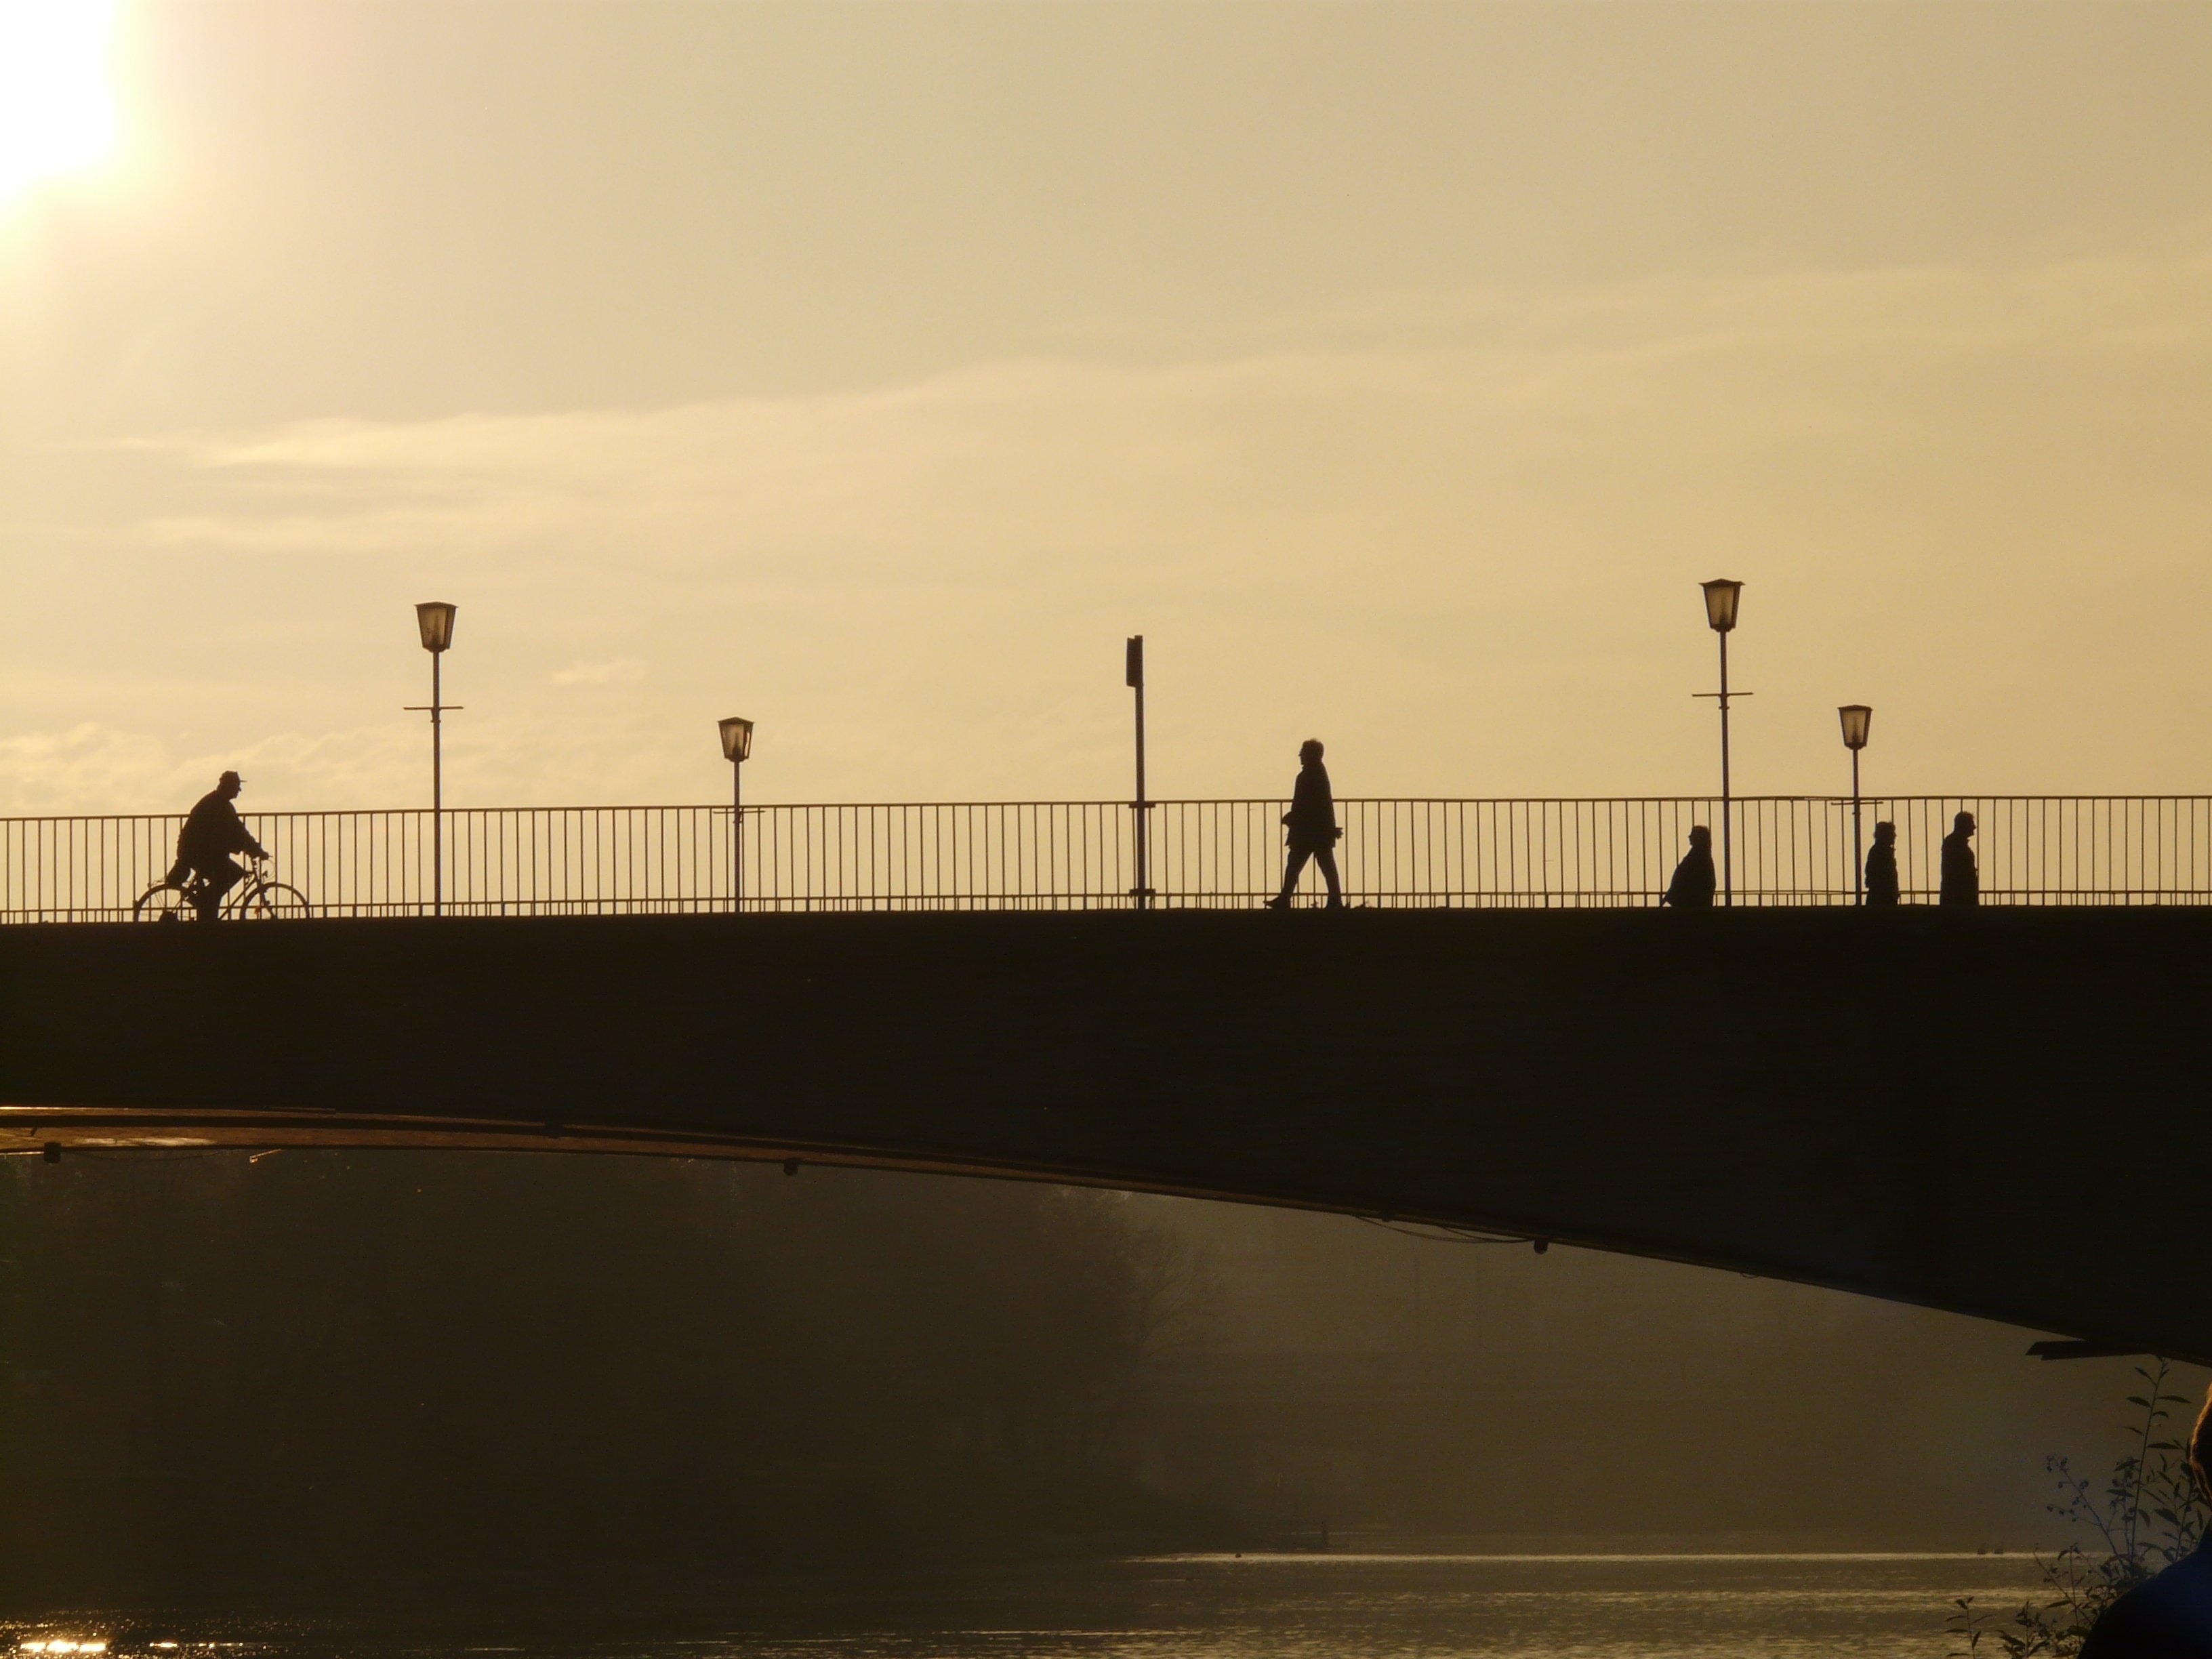 silhouette of bridge and people walking into it during daytime